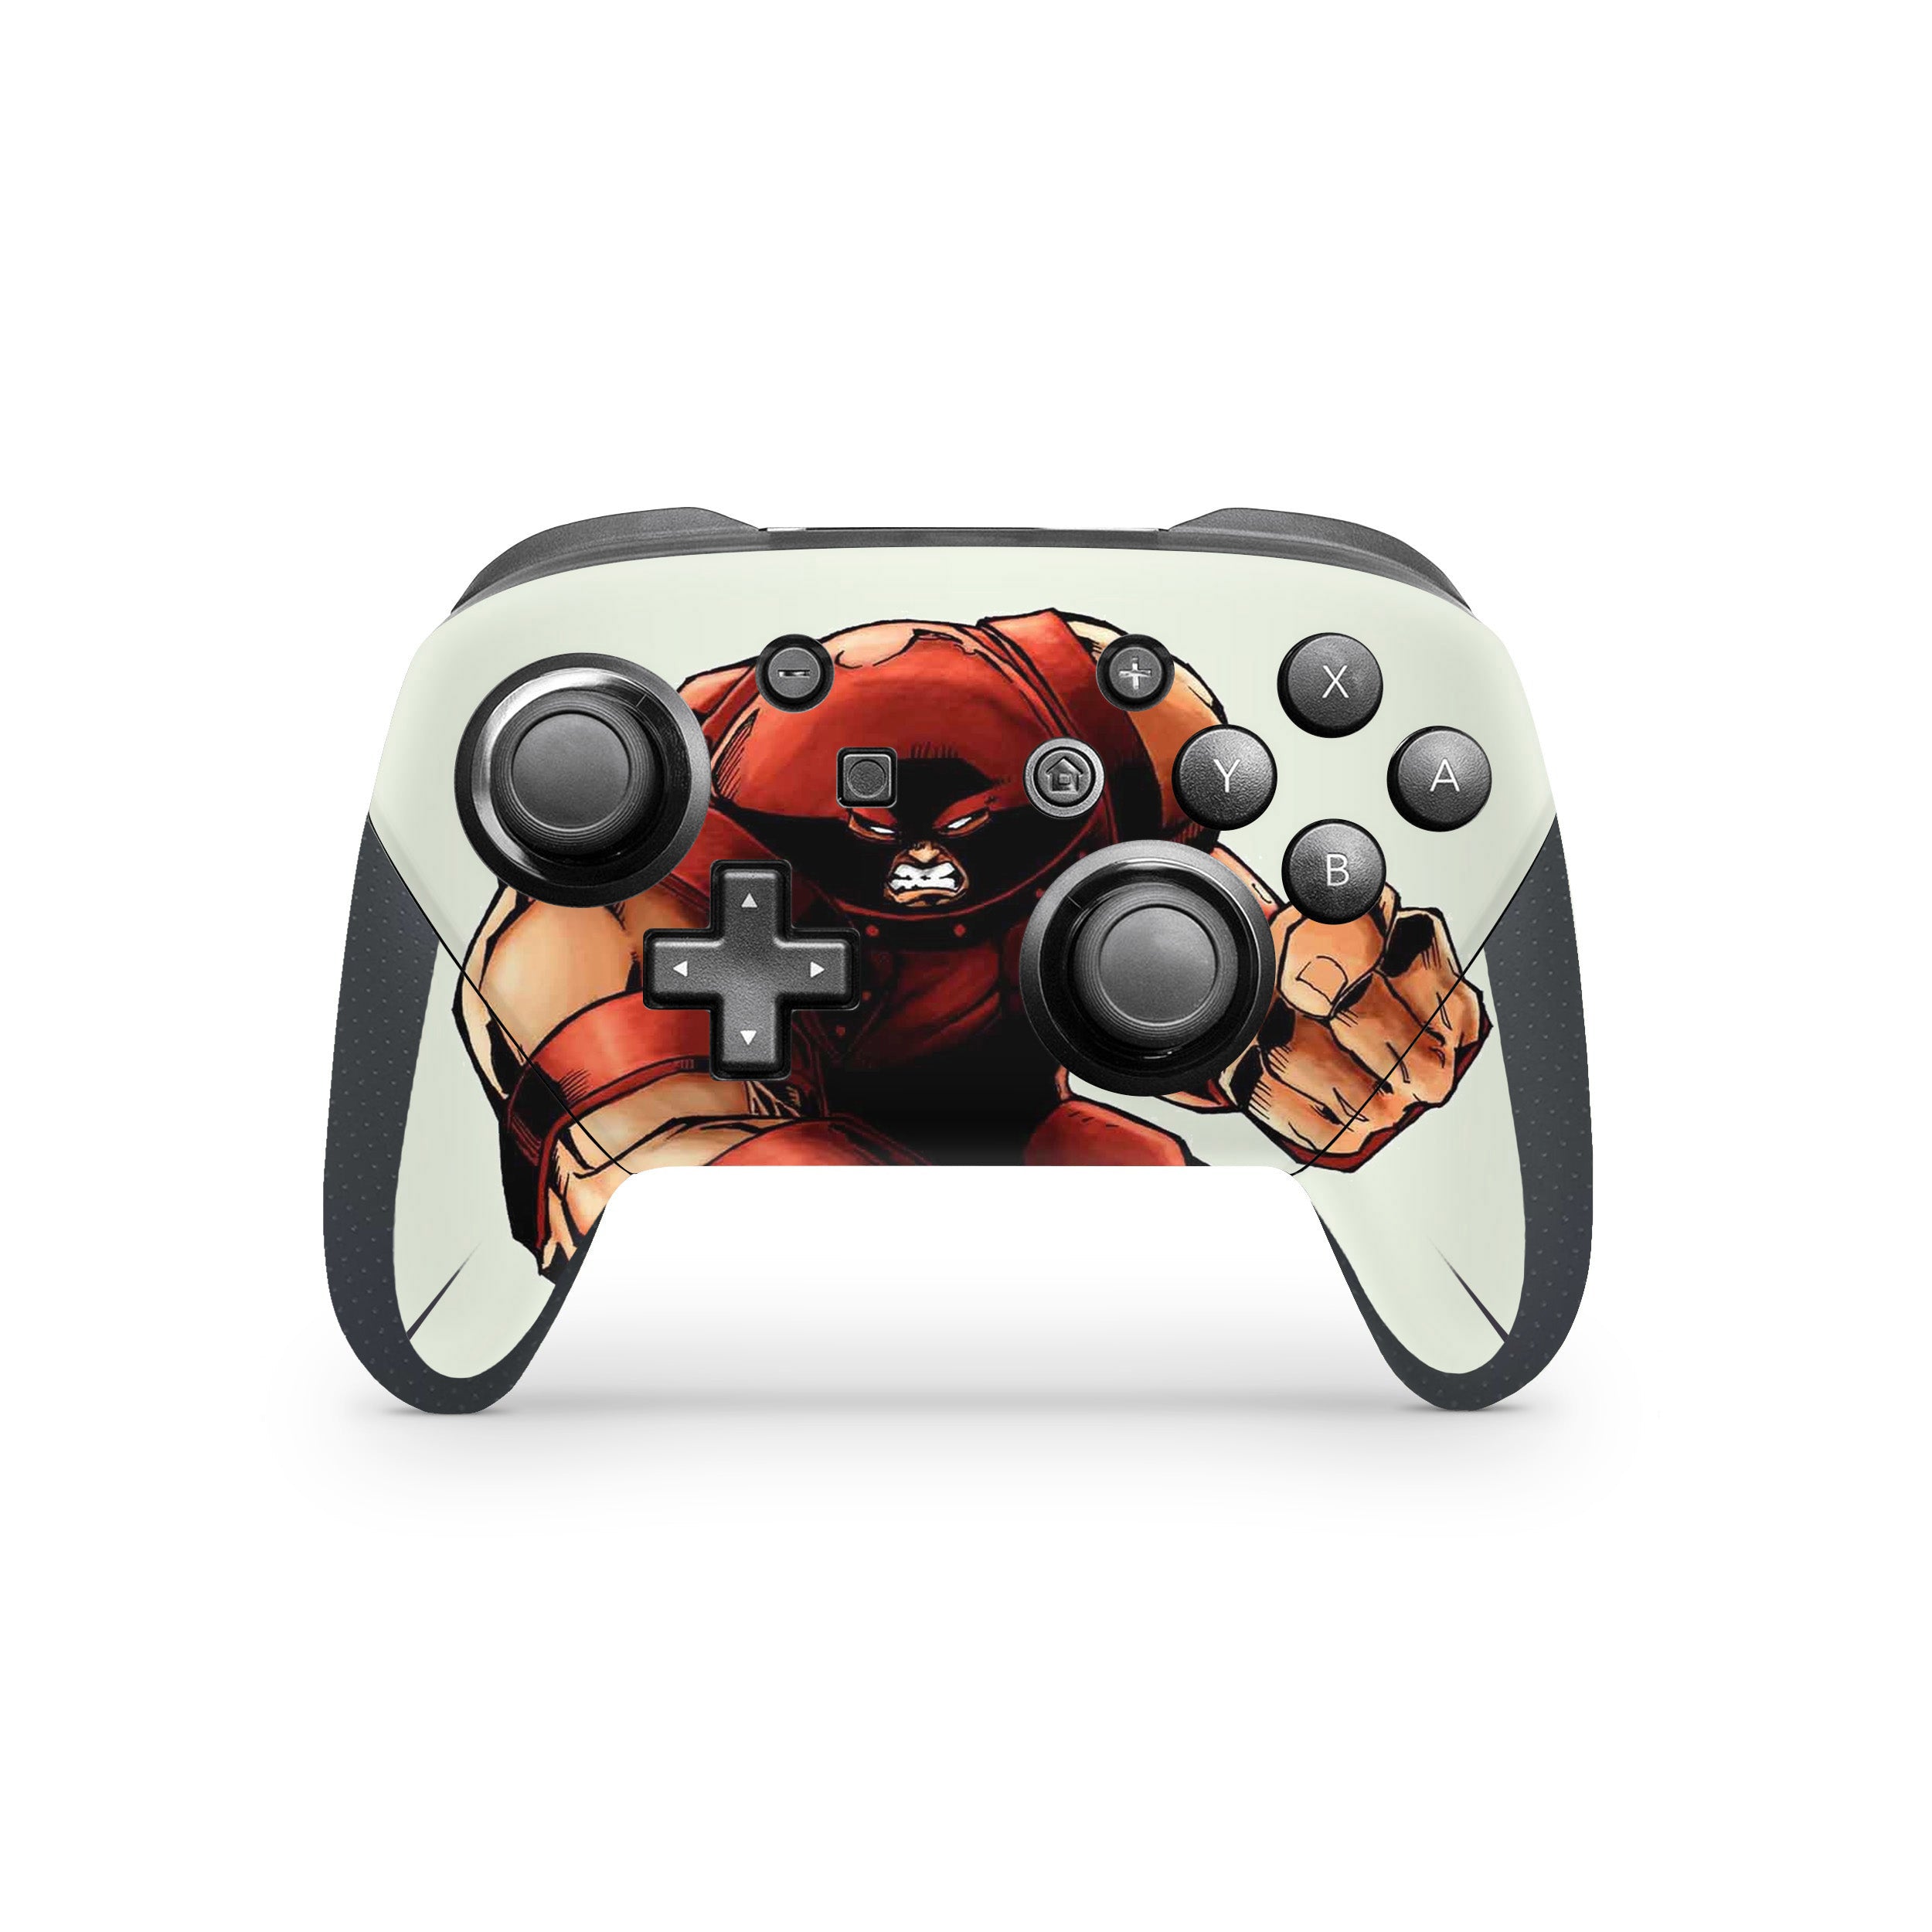 A video game skin featuring a Marvel Comics X Men Cyclops design for the Switch Pro Controller.